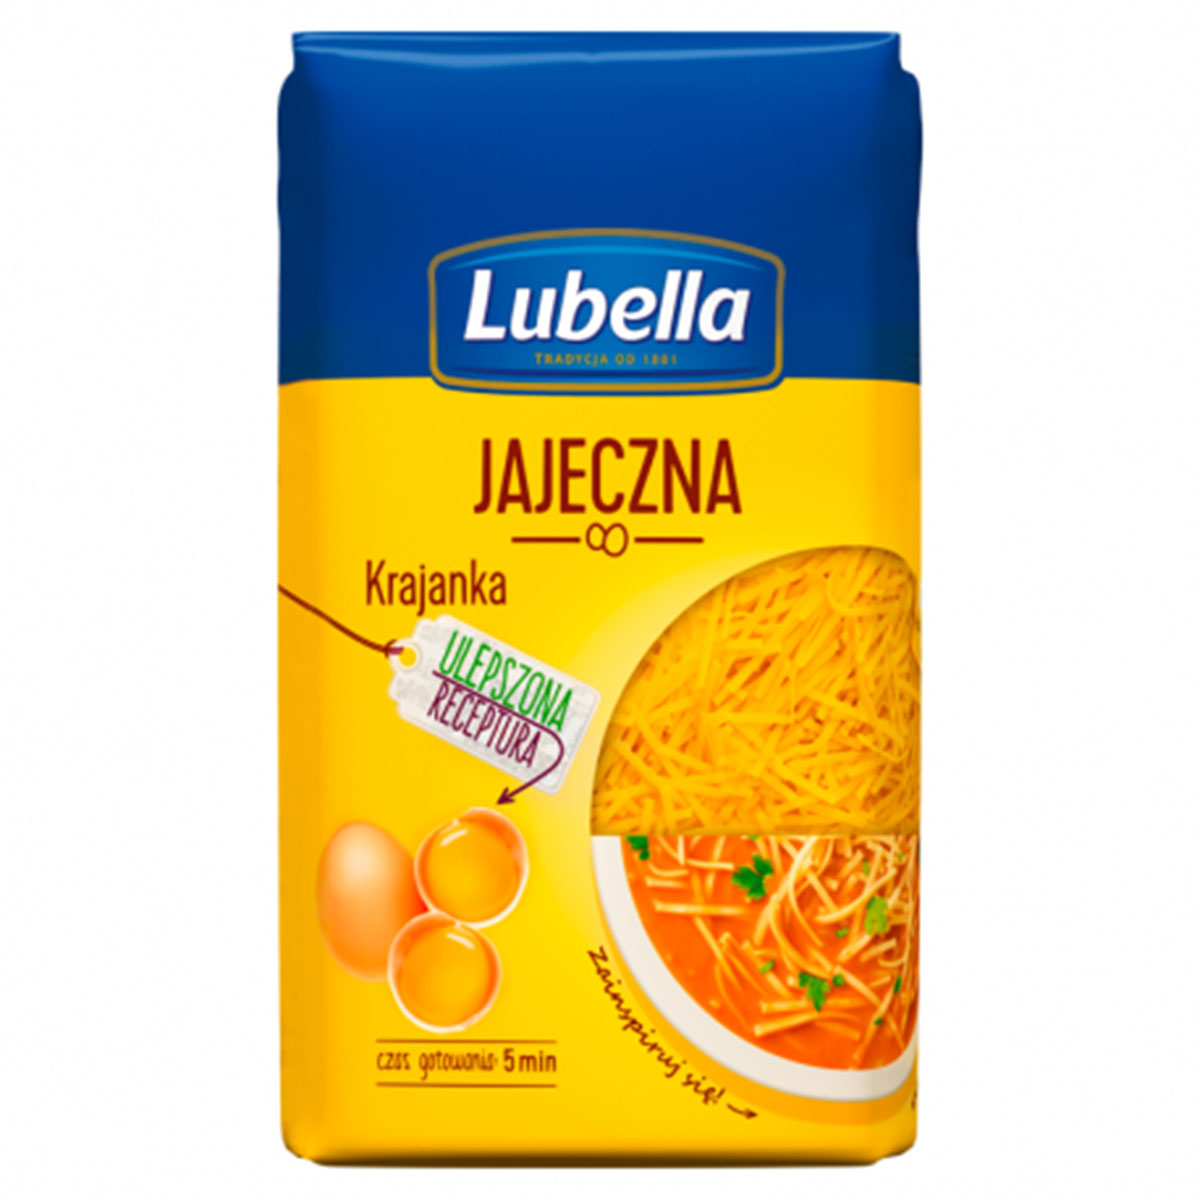 Lubella - Egg Pasta Slices - 250g - Continental Food Store